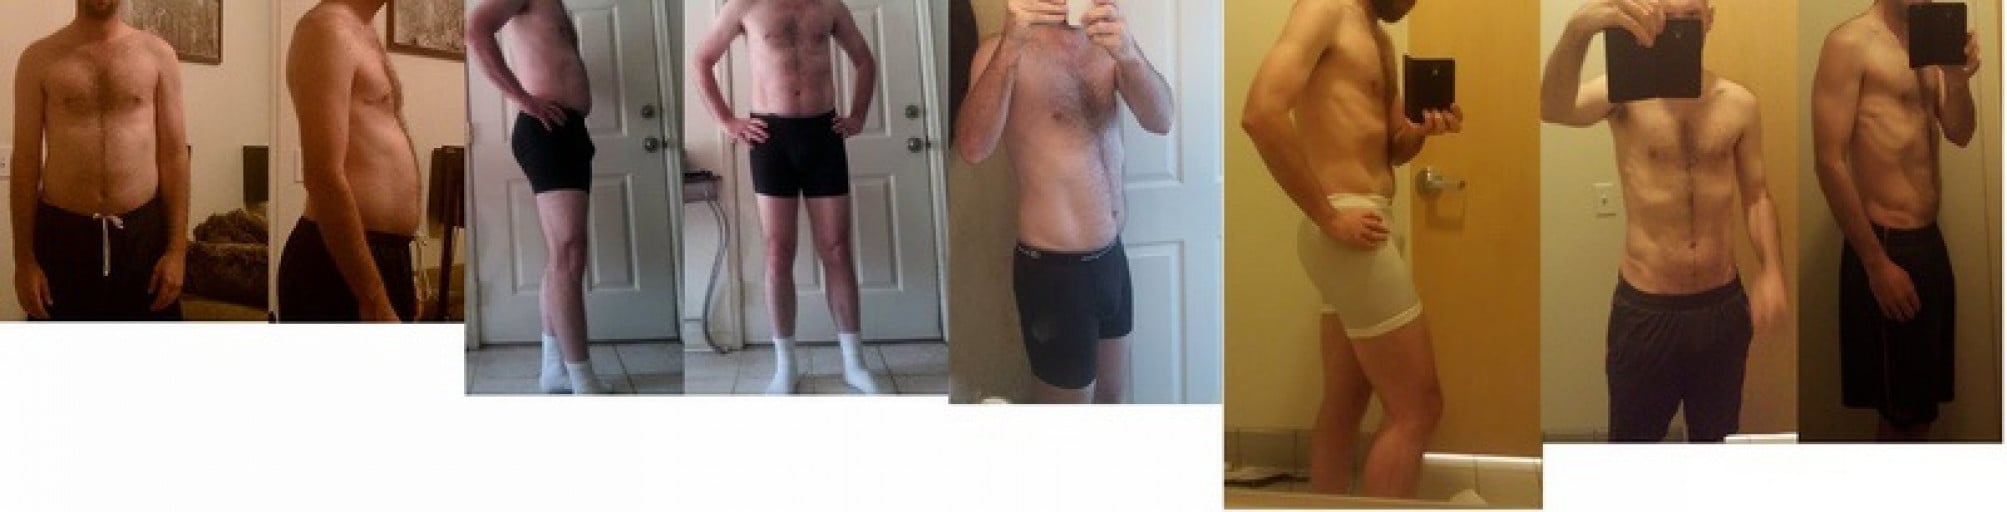 Counting Calories and Cardio: a Reddit User's 37Lbs Weight Journey in 6 Months